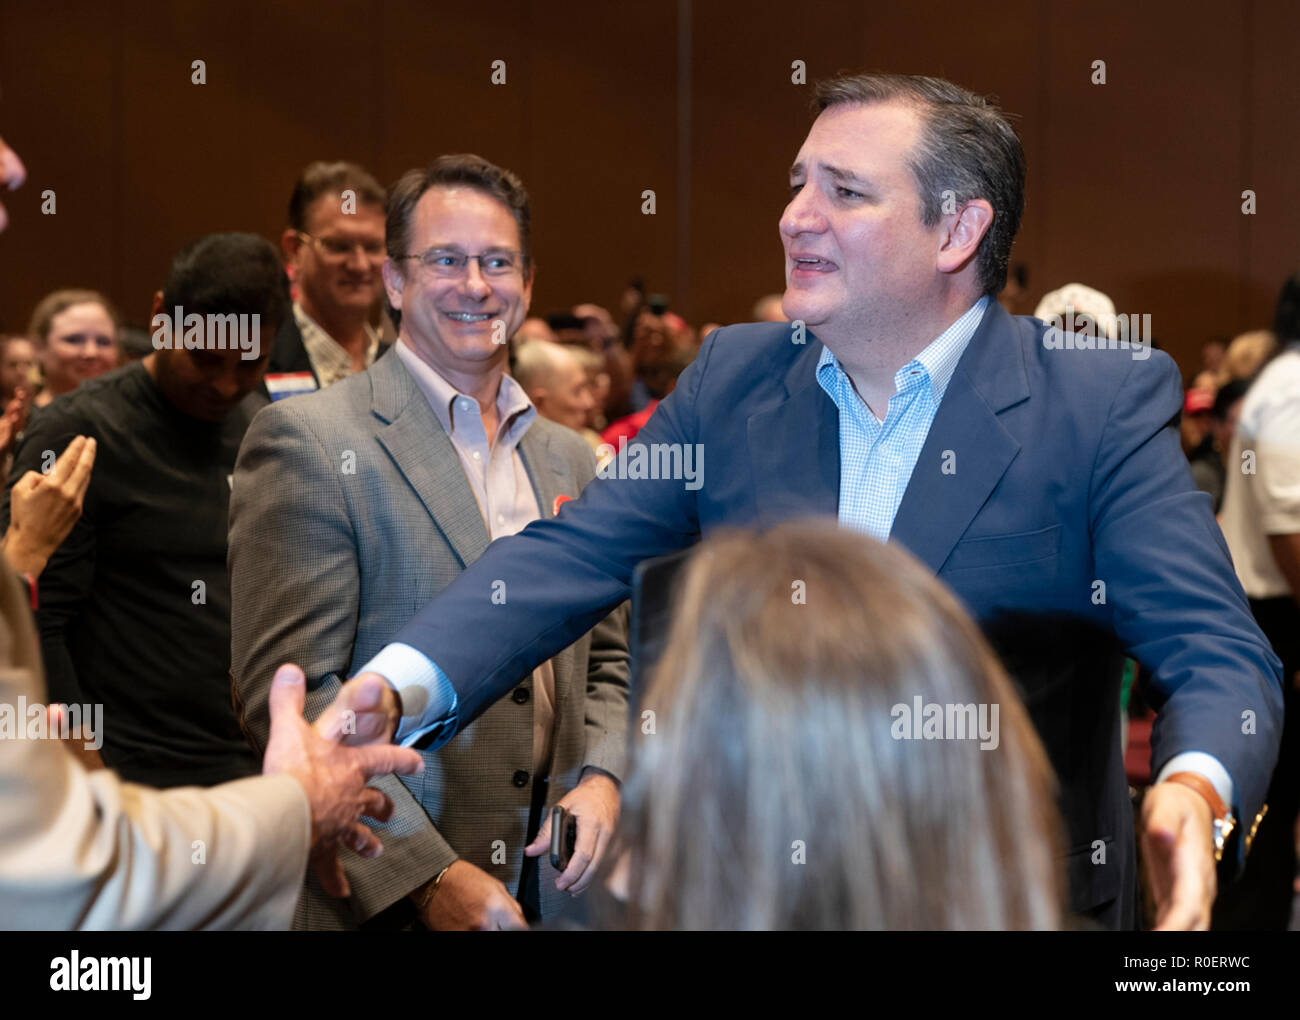 Republican U.S. Sen. Ted Cruz campaigns before a boisterous crowd of about 500 on the last weekend before the midterm elections where he's locked in a close battle with Democratic challenger Beto O'Rourke. Stock Photo